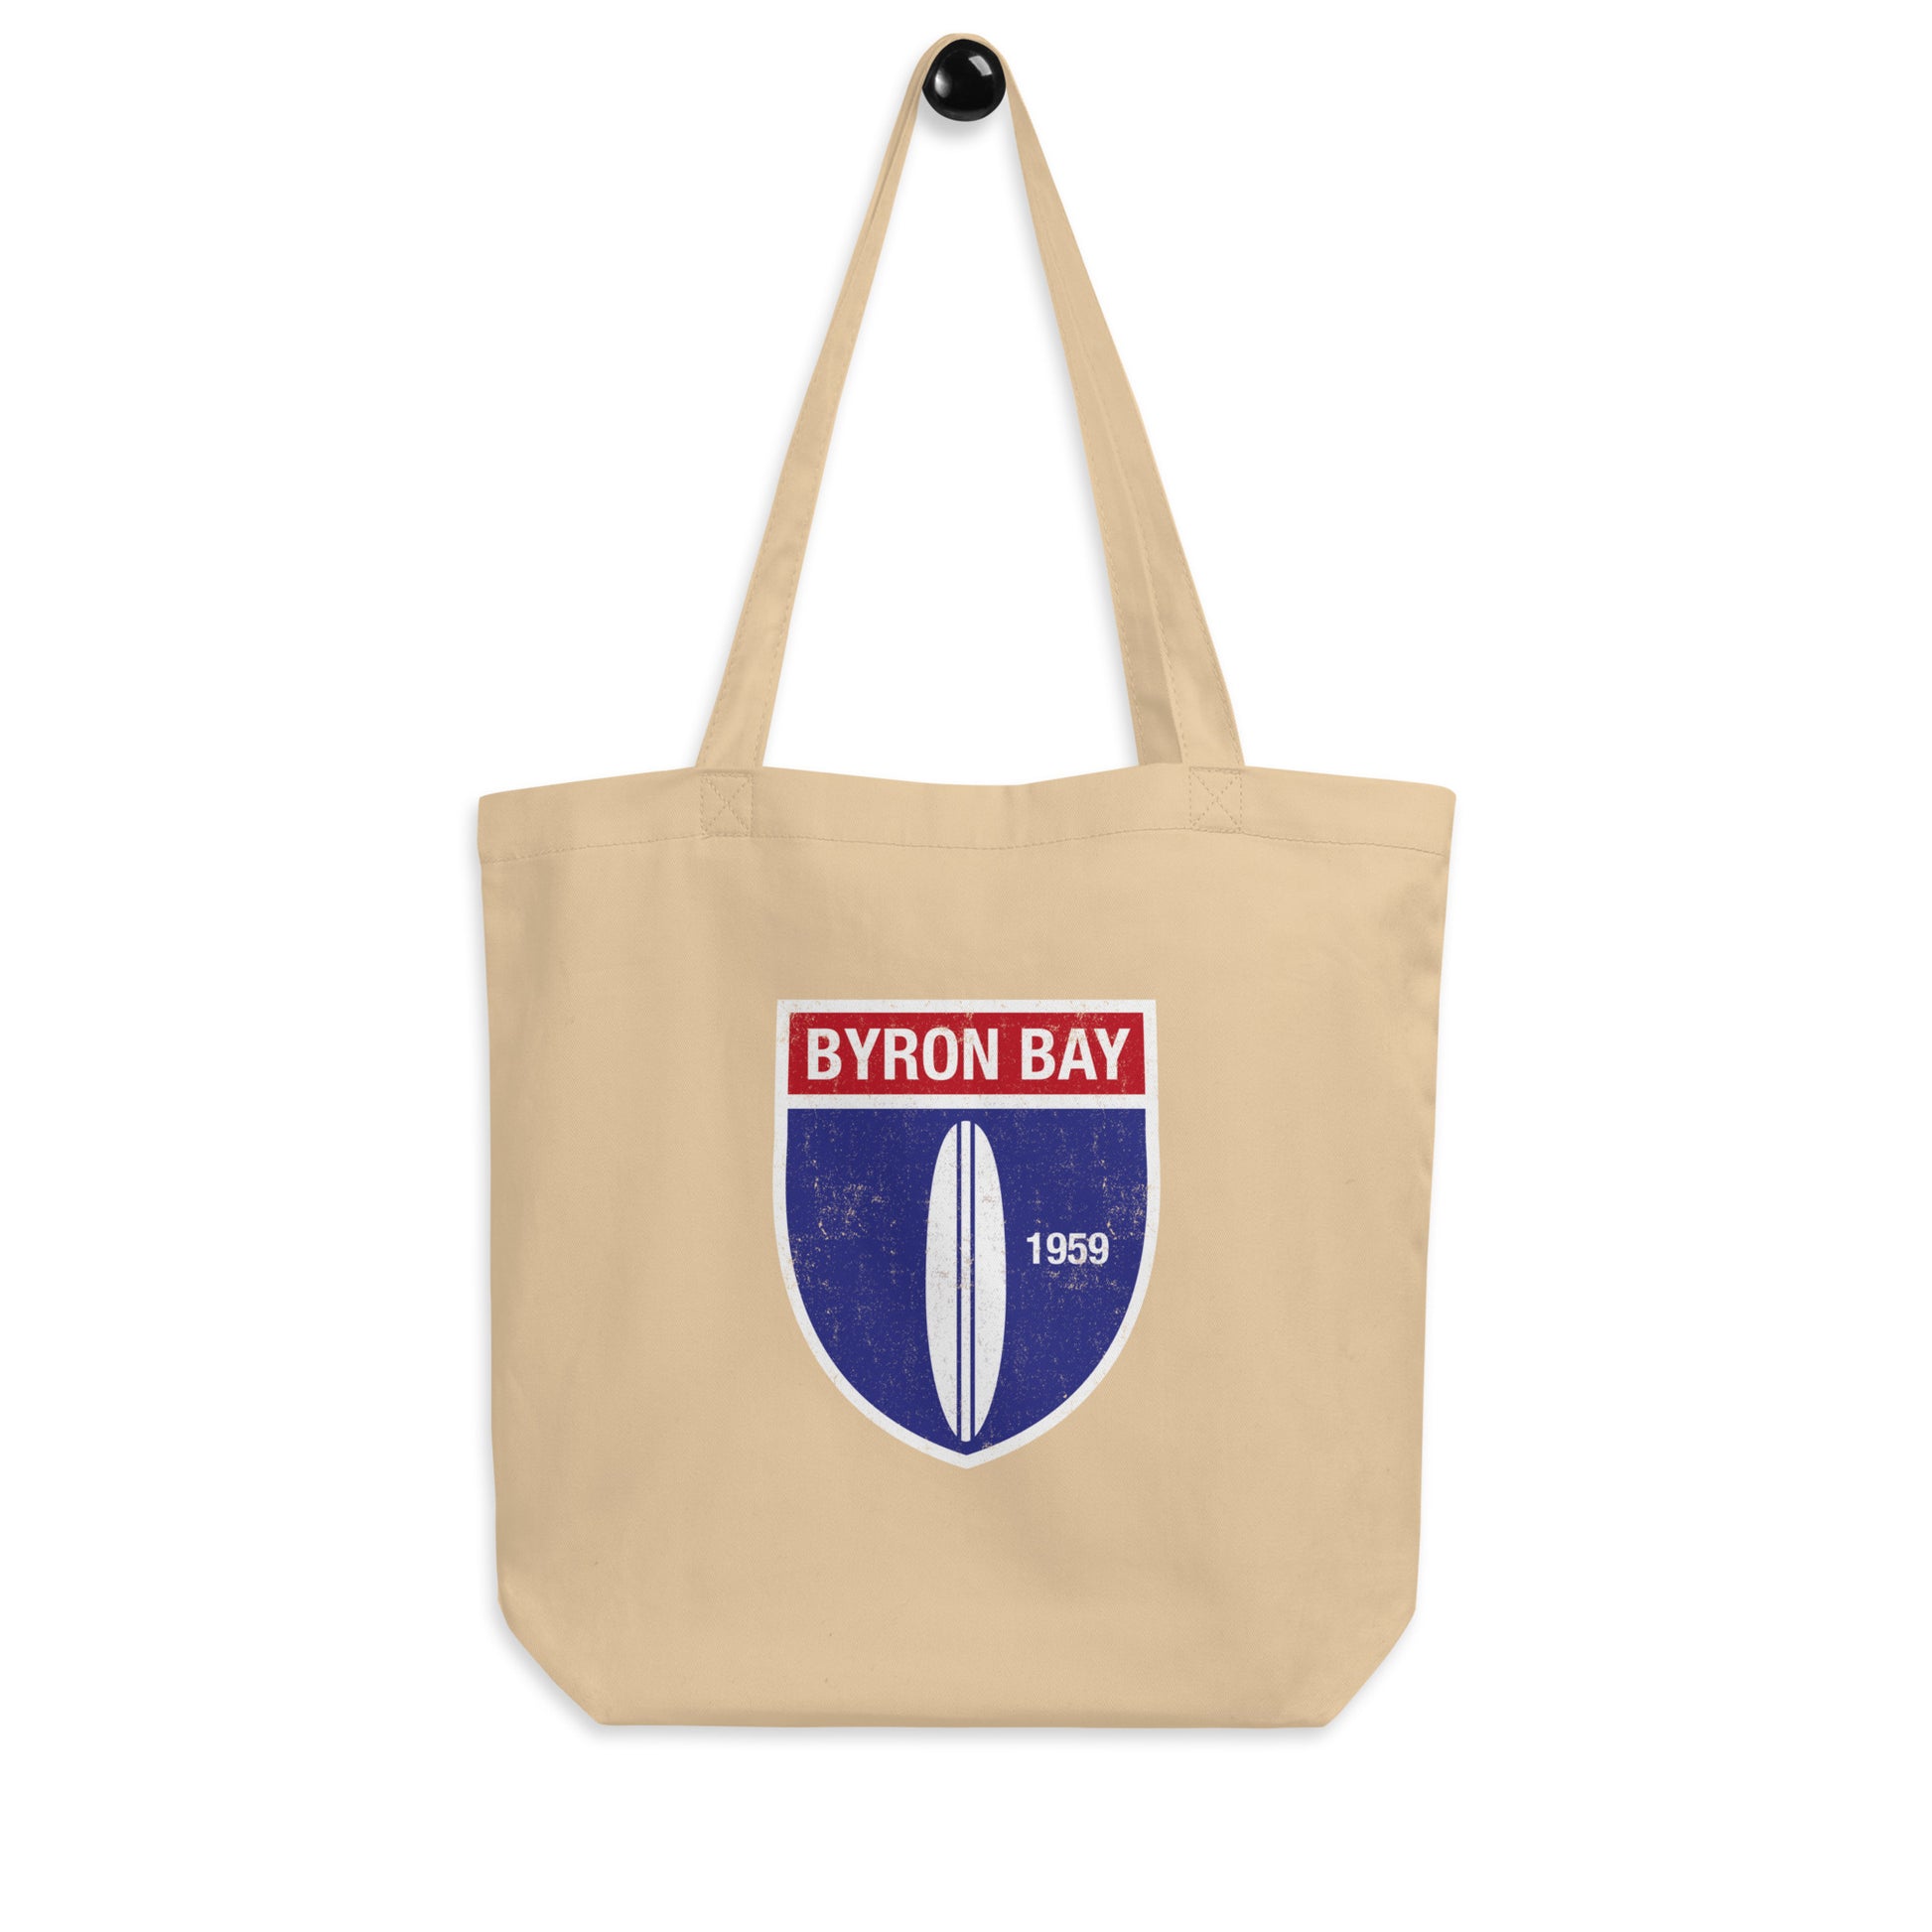  Eco Tote Bag - Natural Cream / Oyster Colour - Front view - With Byron Bay Vintage logo front - Genuine Byron Bay Merchandise | Produced by Go Sea Kayak Byron Bay 